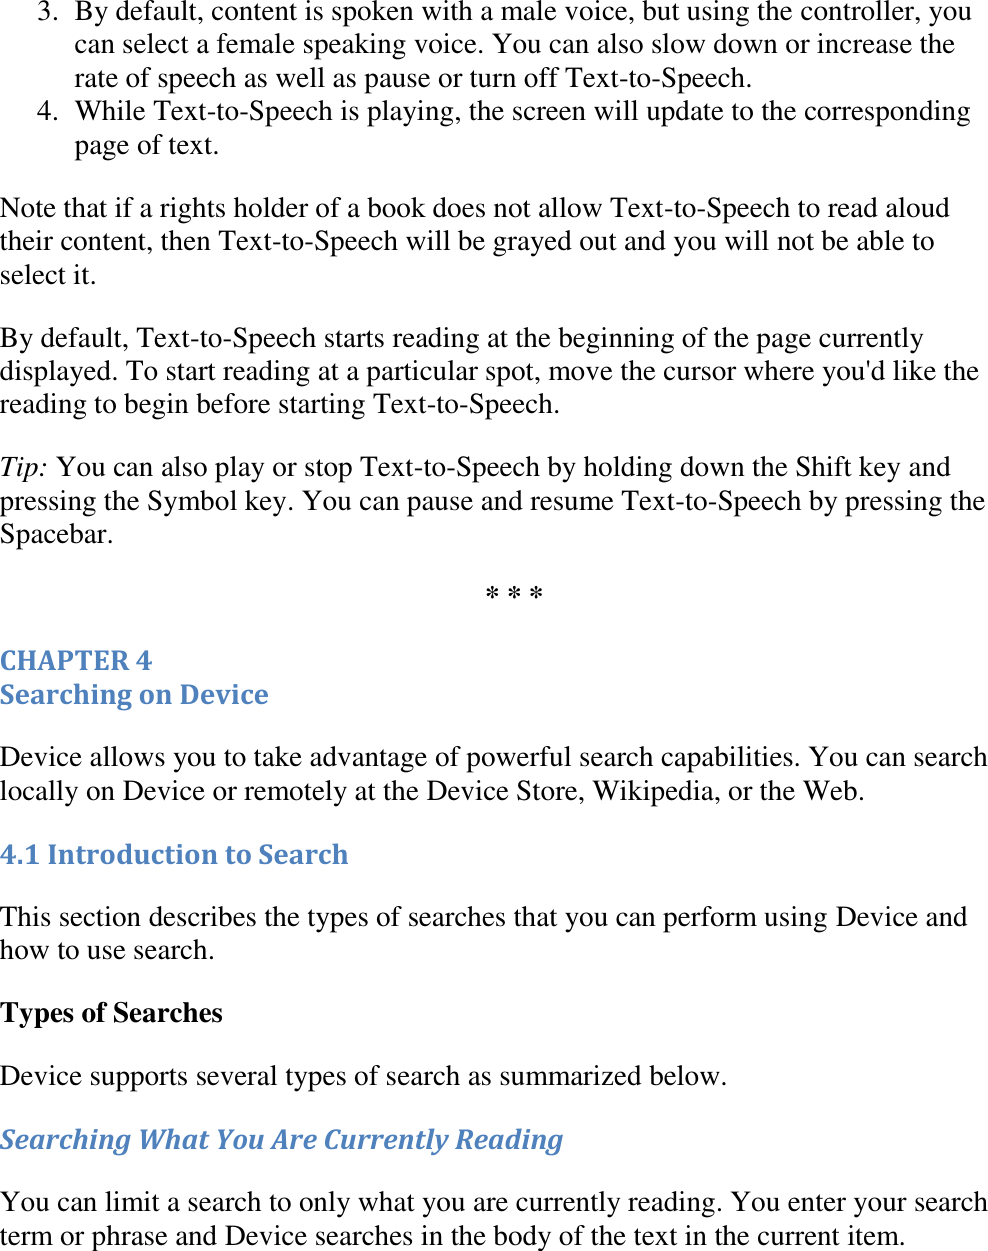   3. By default, content is spoken with a male voice, but using the controller, you can select a female speaking voice. You can also slow down or increase the rate of speech as well as pause or turn off Text-to-Speech.  4. While Text-to-Speech is playing, the screen will update to the corresponding page of text.  Note that if a rights holder of a book does not allow Text-to-Speech to read aloud their content, then Text-to-Speech will be grayed out and you will not be able to select it. By default, Text-to-Speech starts reading at the beginning of the page currently displayed. To start reading at a particular spot, move the cursor where you&apos;d like the reading to begin before starting Text-to-Speech. Tip: You can also play or stop Text-to-Speech by holding down the Shift key and pressing the Symbol key. You can pause and resume Text-to-Speech by pressing the Spacebar. * * * CHAPTER 4 Searching on Device Device allows you to take advantage of powerful search capabilities. You can search locally on Device or remotely at the Device Store, Wikipedia, or the Web. 4.1 Introduction to Search This section describes the types of searches that you can perform using Device and how to use search. Types of Searches Device supports several types of search as summarized below. Searching What You Are Currently Reading You can limit a search to only what you are currently reading. You enter your search term or phrase and Device searches in the body of the text in the current item. 